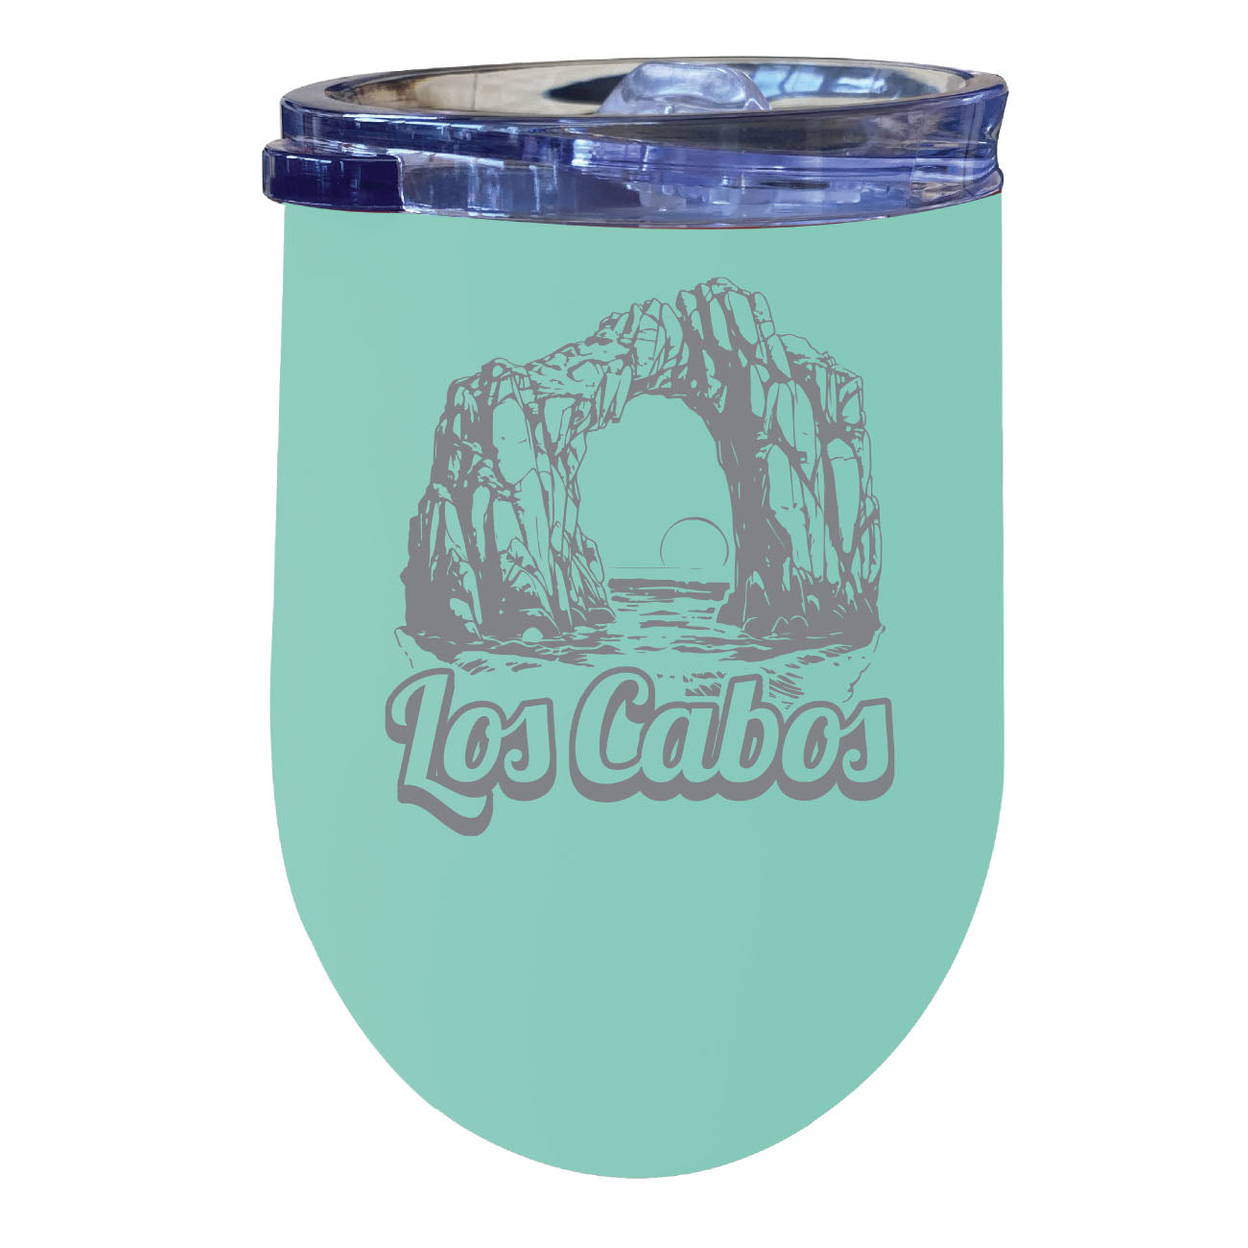 Los Cabos Mexico Souvenir 12 Oz Engraved Insulated Wine Stainless Steel Tumbler - Seafoam,,Single Unit